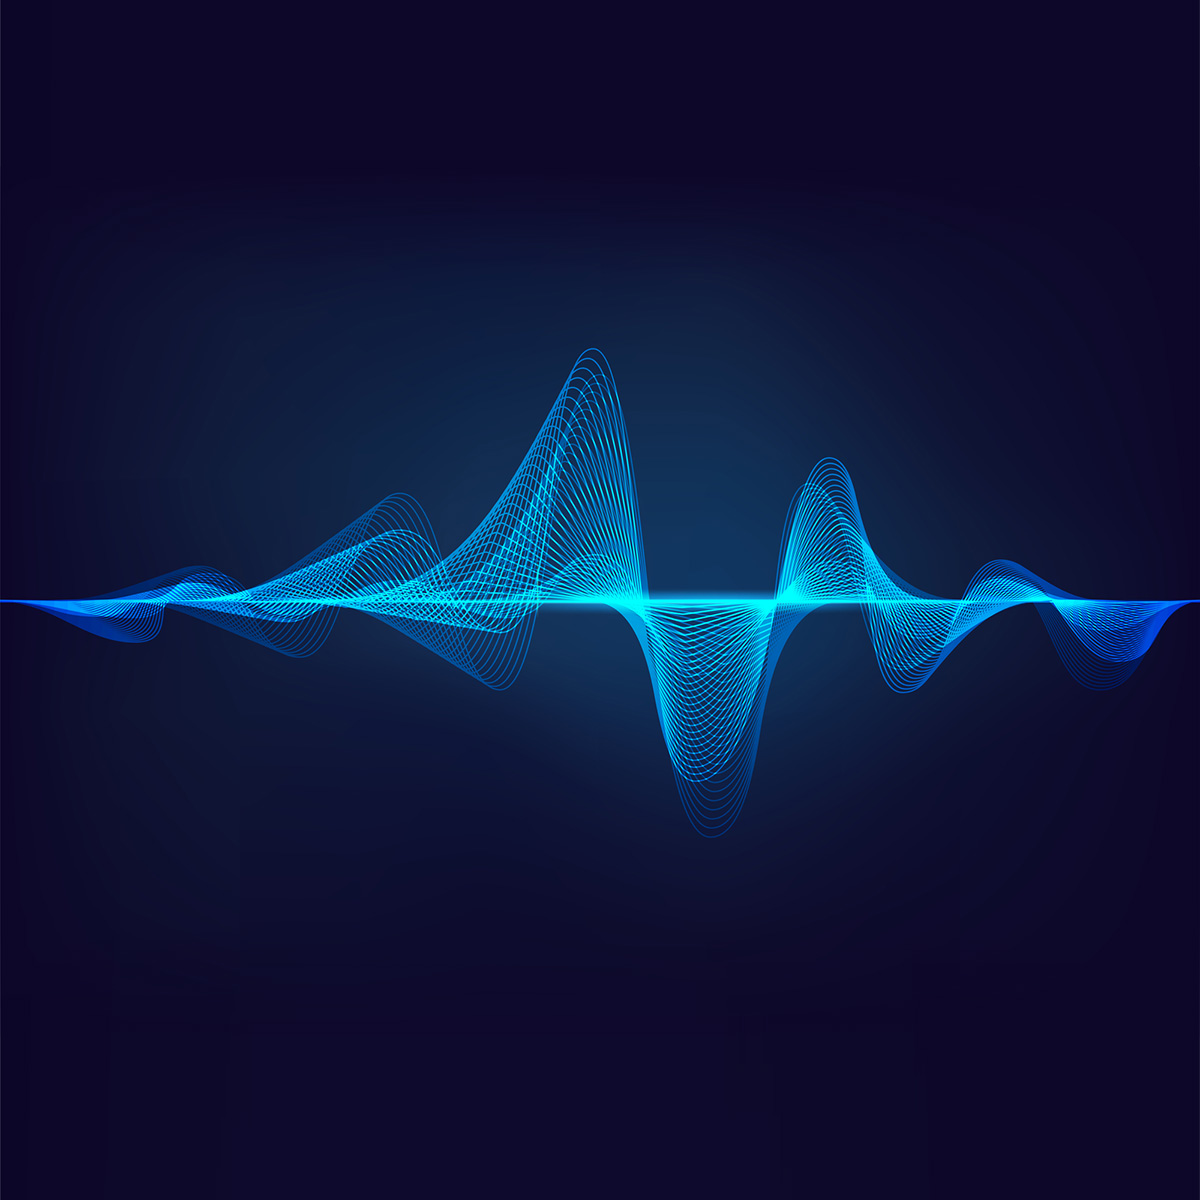 Image of wavelength implying sound from a musician